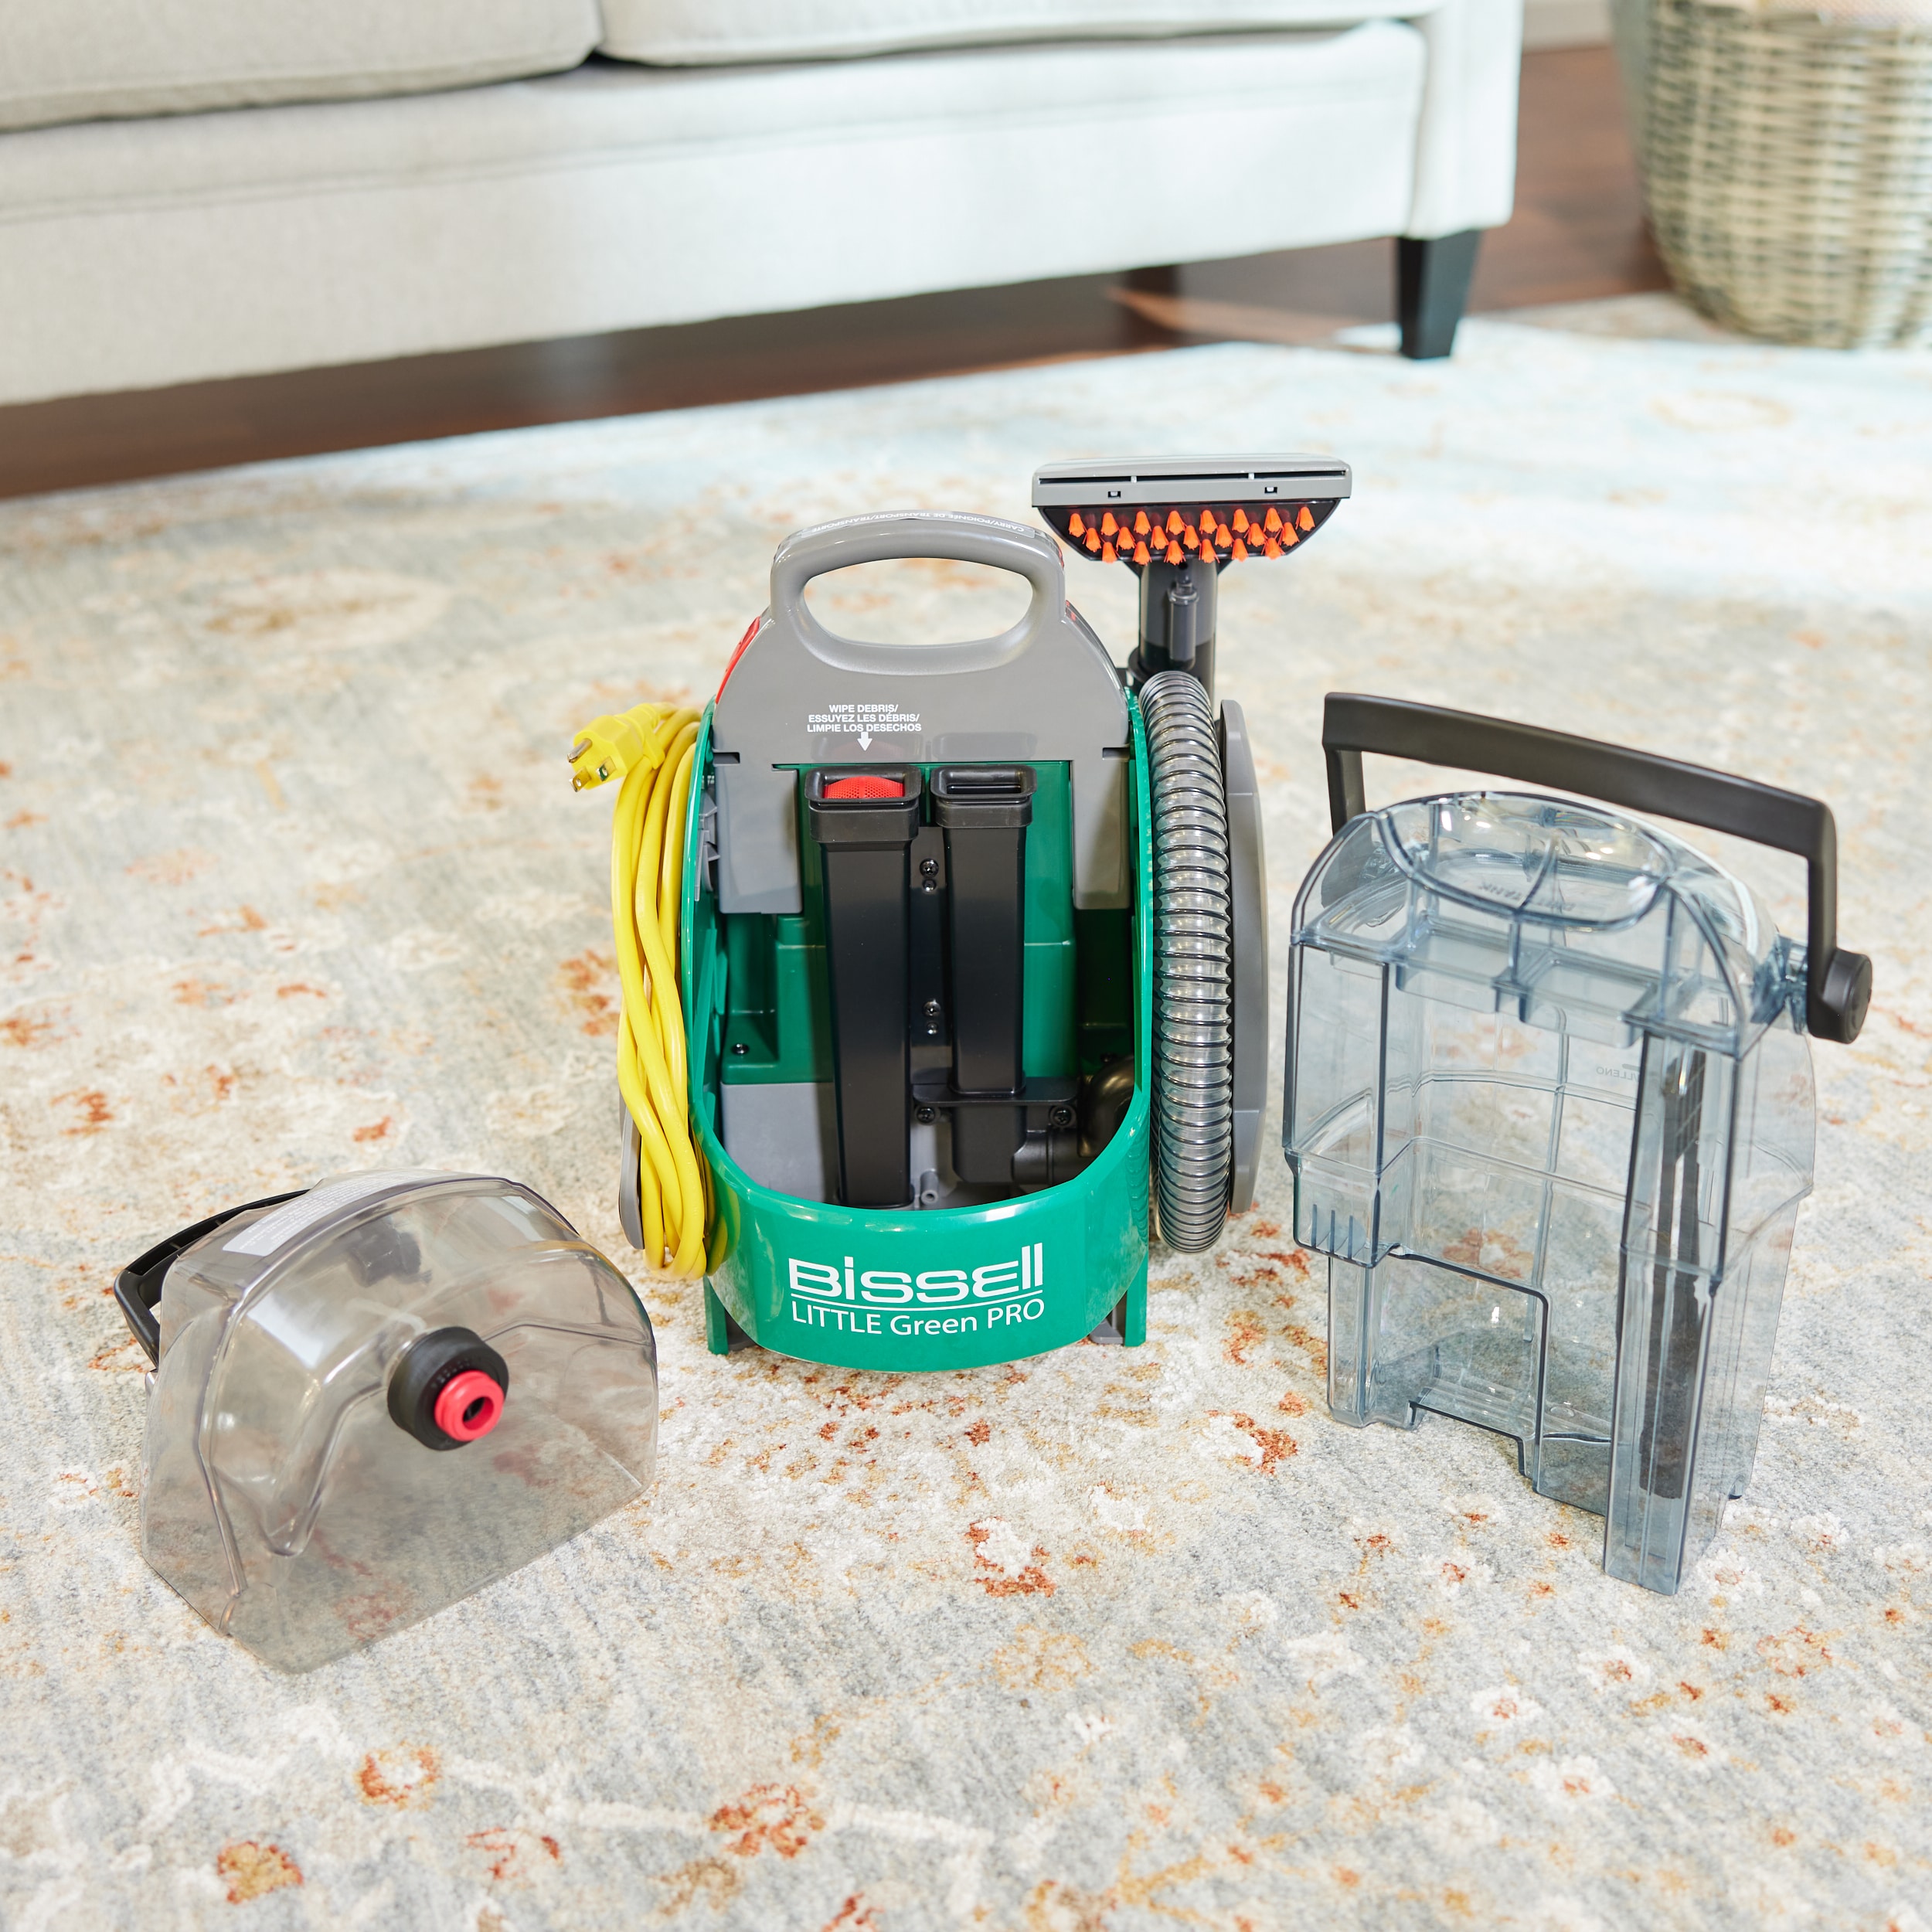 BISSELL Commercial spot Extractor Carpet Cleaner in the Carpet